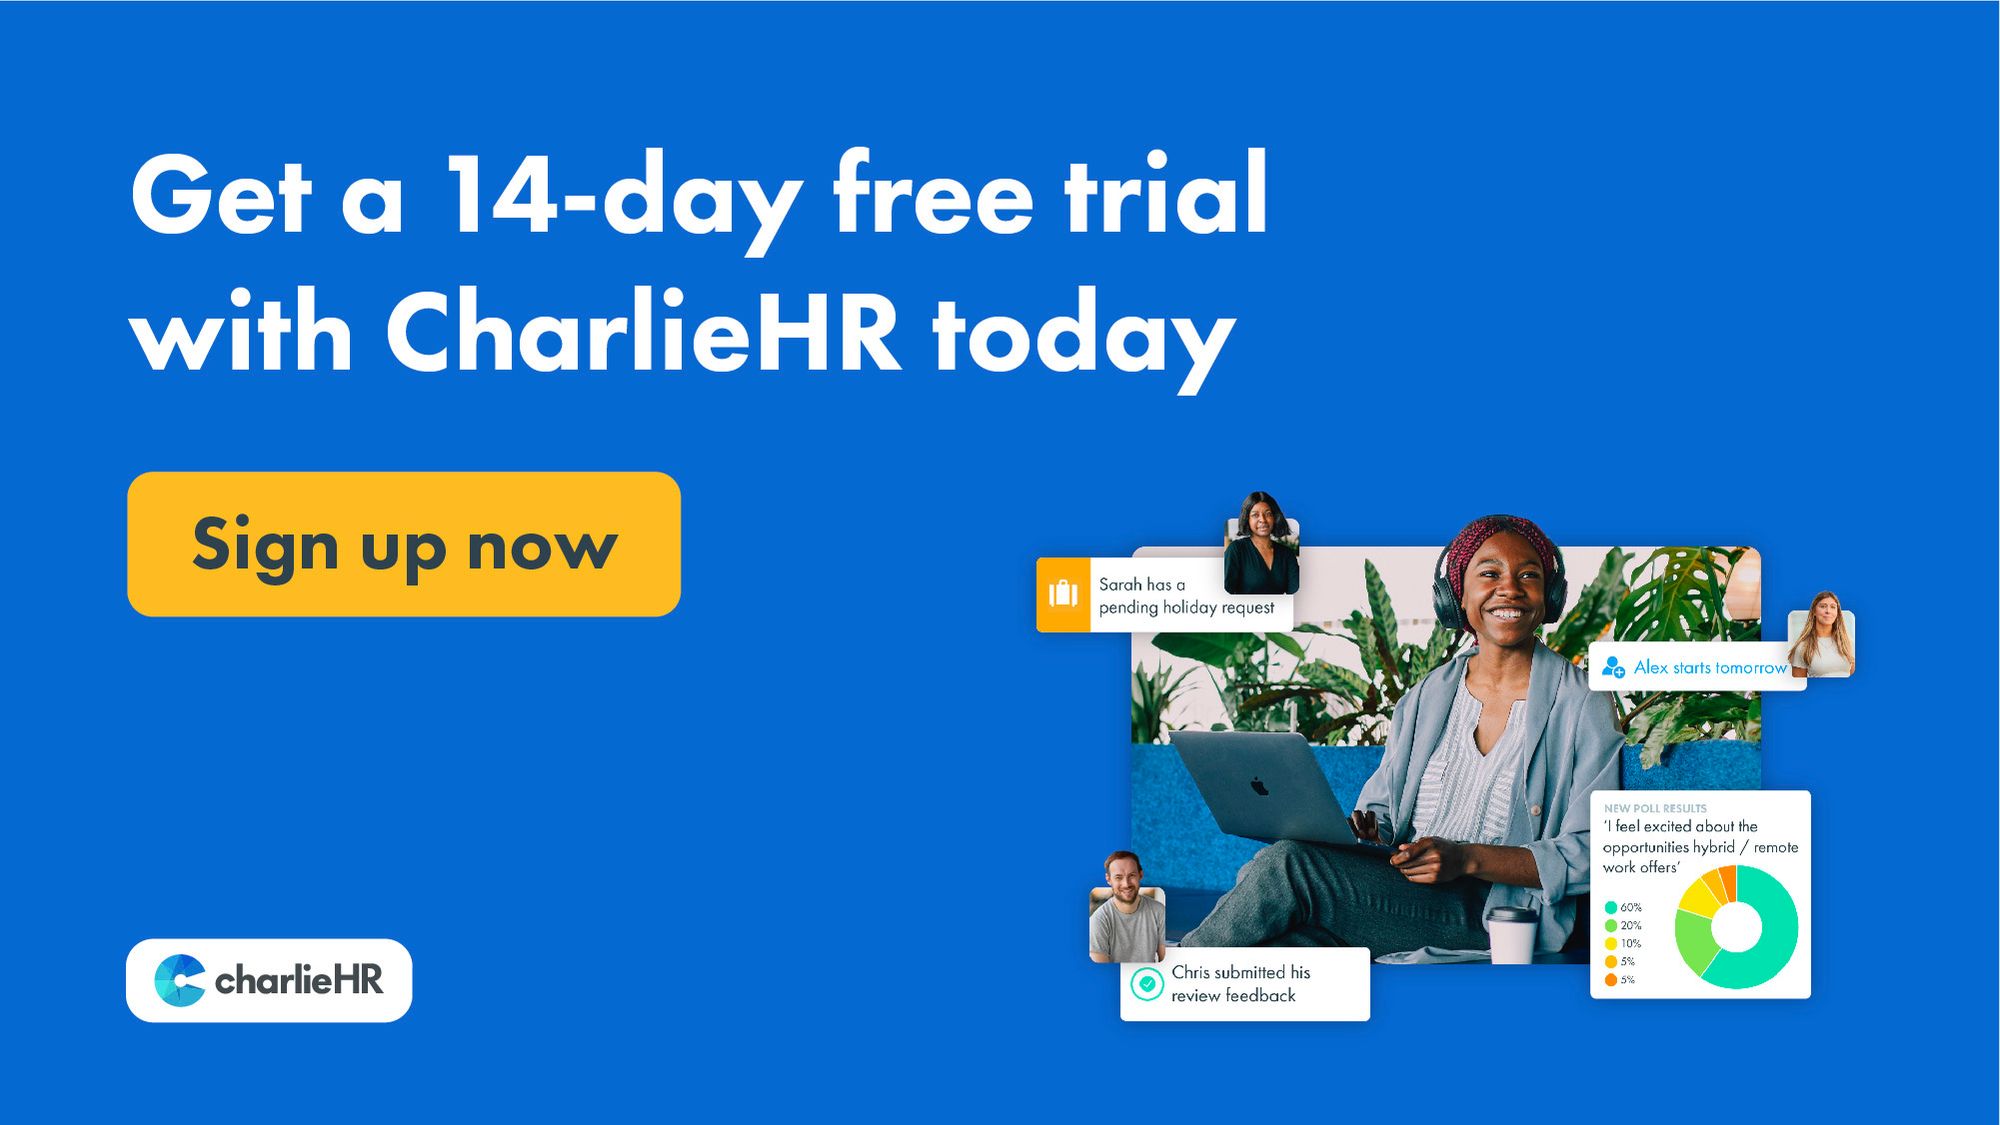 Click here to enjoy a free 14-day trial with CharlieHR